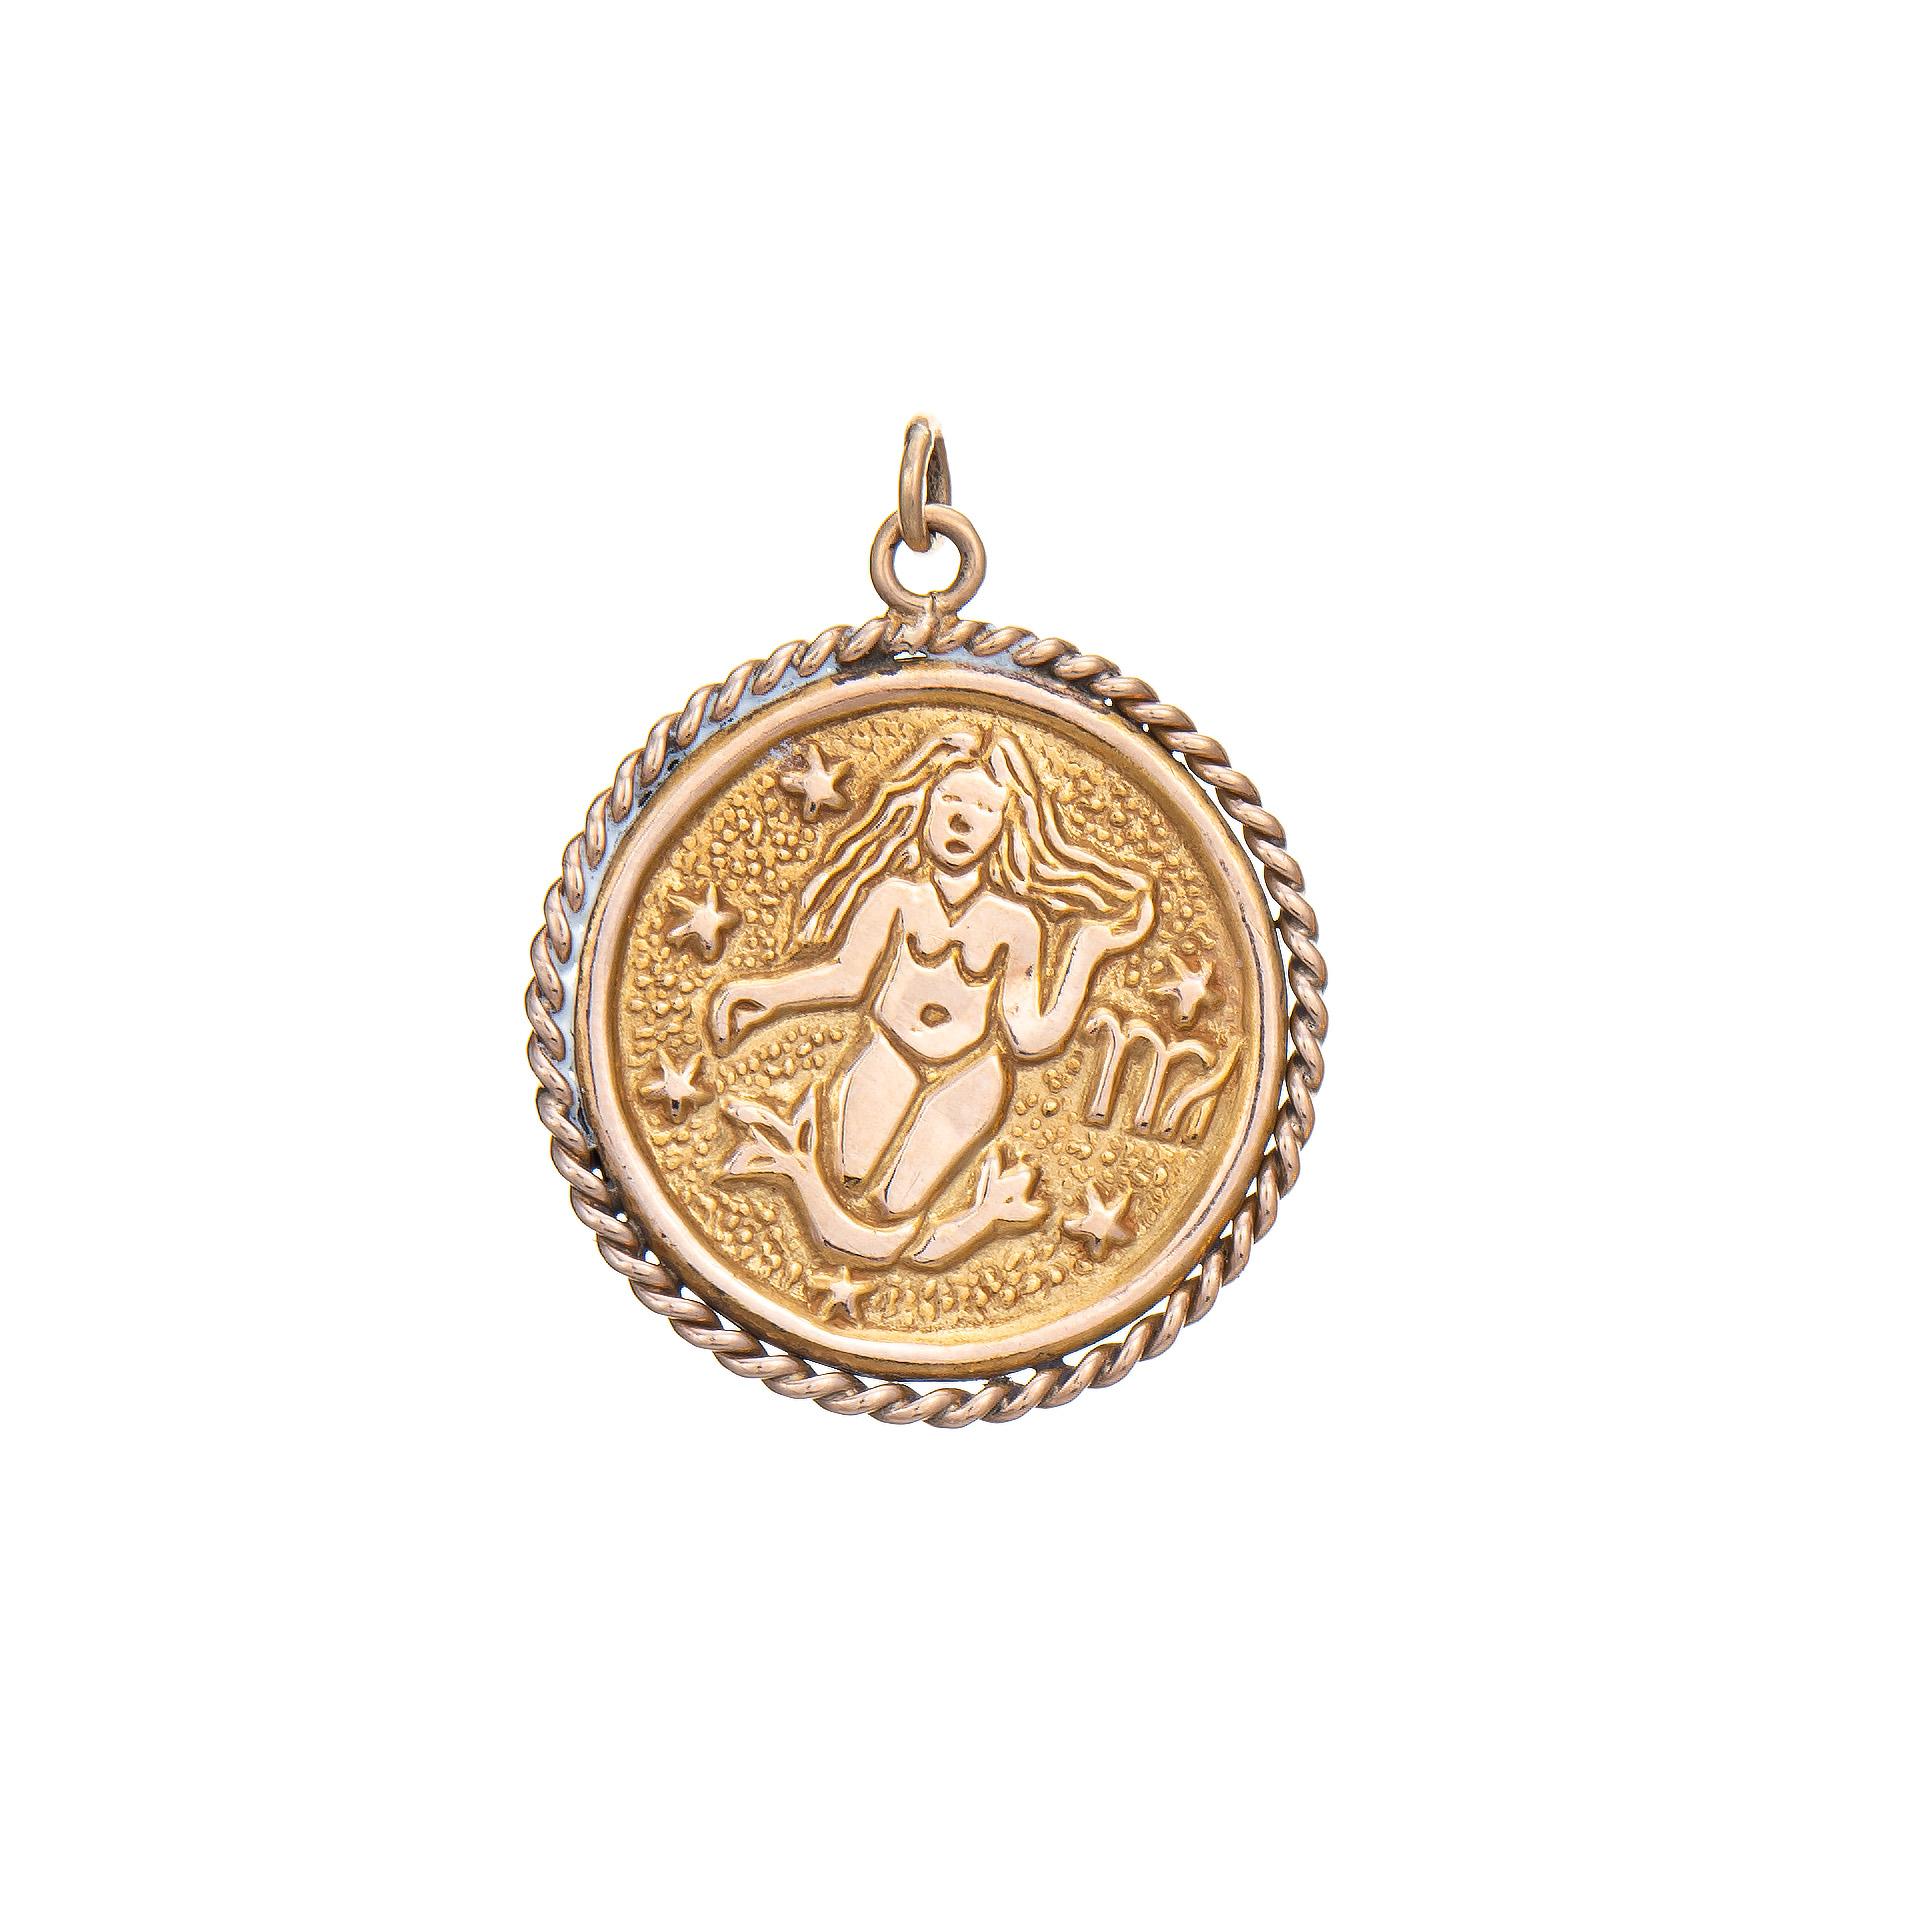 Finely detailed Virgo medallion pendant crafted in 14k yellow gold (circa 1970s).   

The medallion pendant measures 26mm diameter (1.02 inches) and features a double-sided Virgo design. The bale measures 3mm wide and can accommodate a thin to